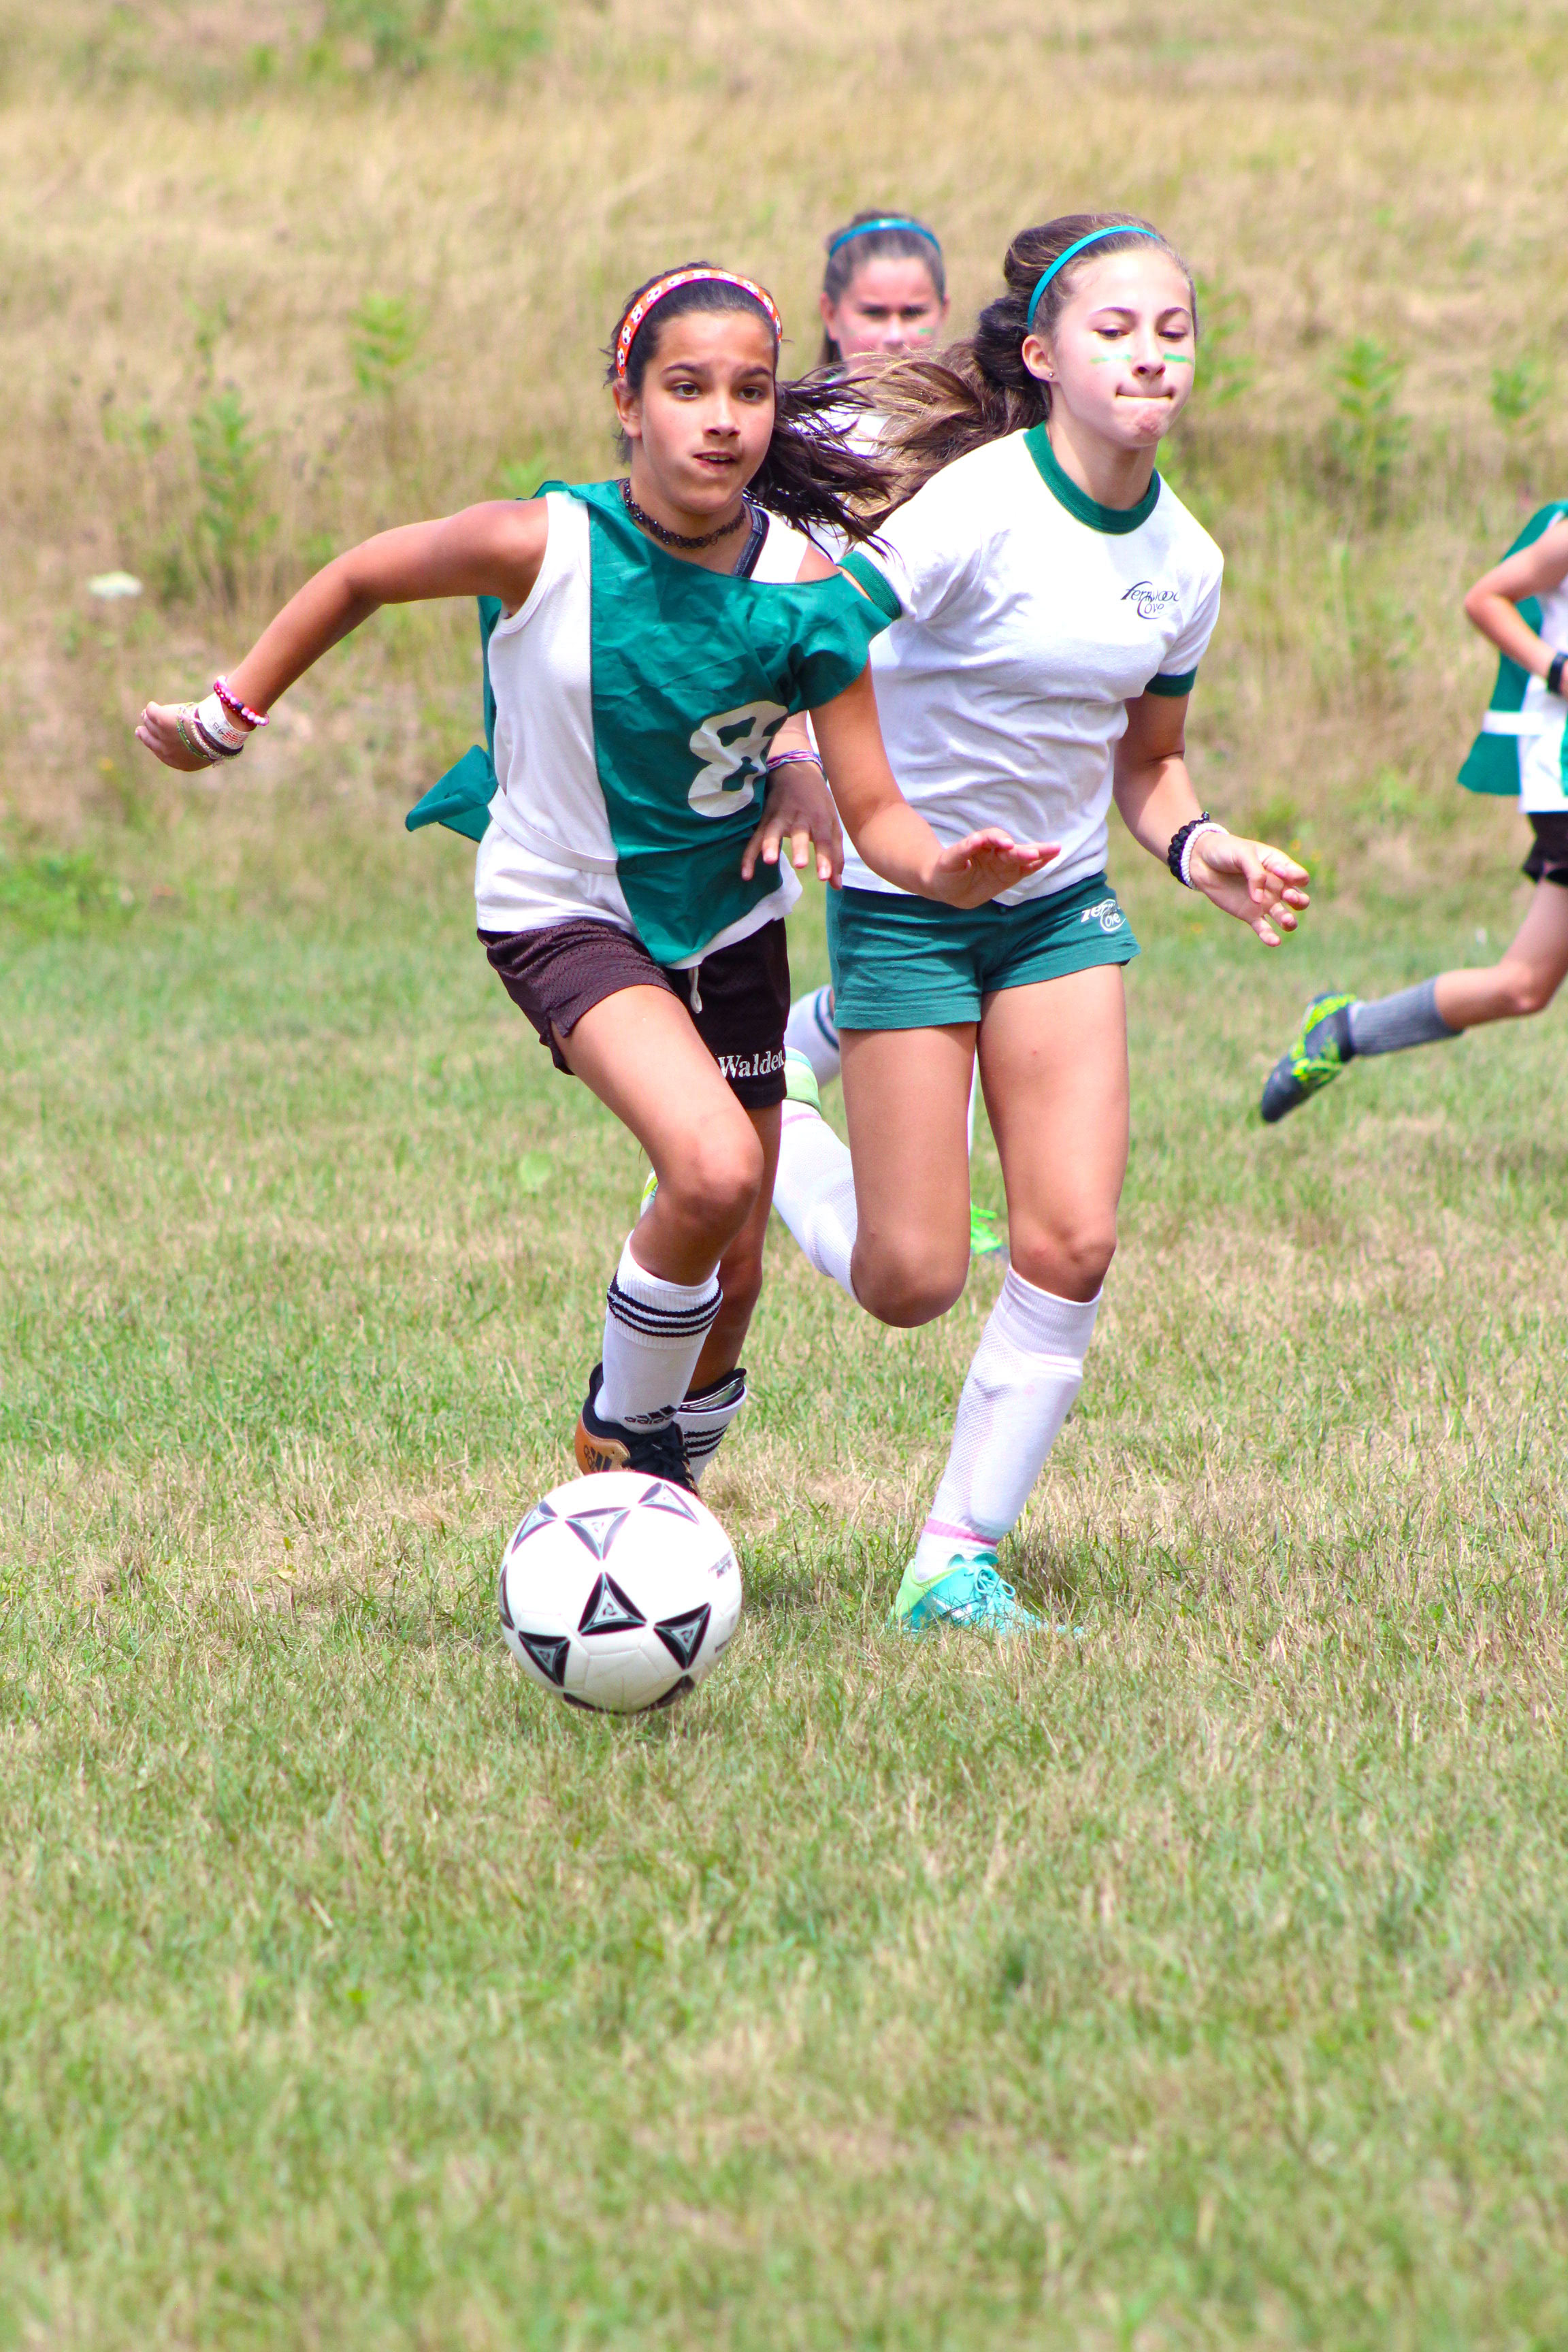 Two young campers play soccer together on a field.